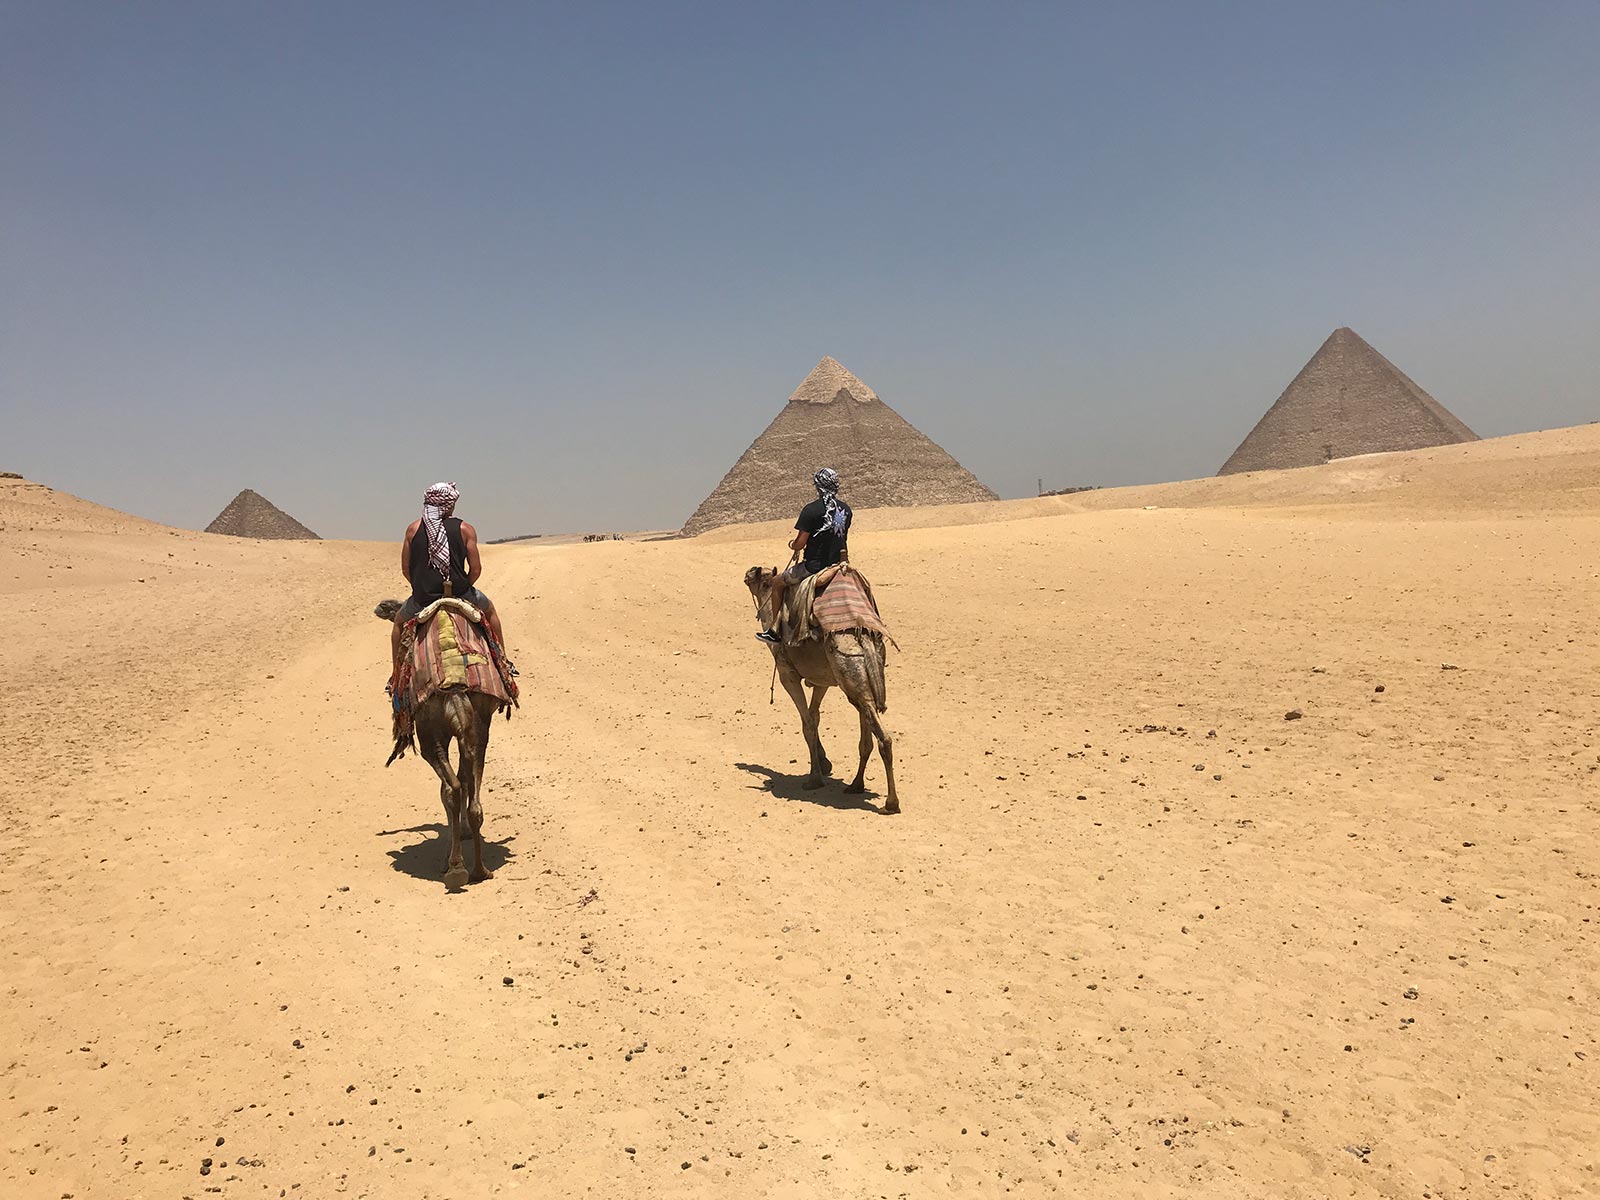 David Simpson and friend riding camel to the pyramids in Cairo, Egypt. Getting inside the Ancient Pyramids of Giza